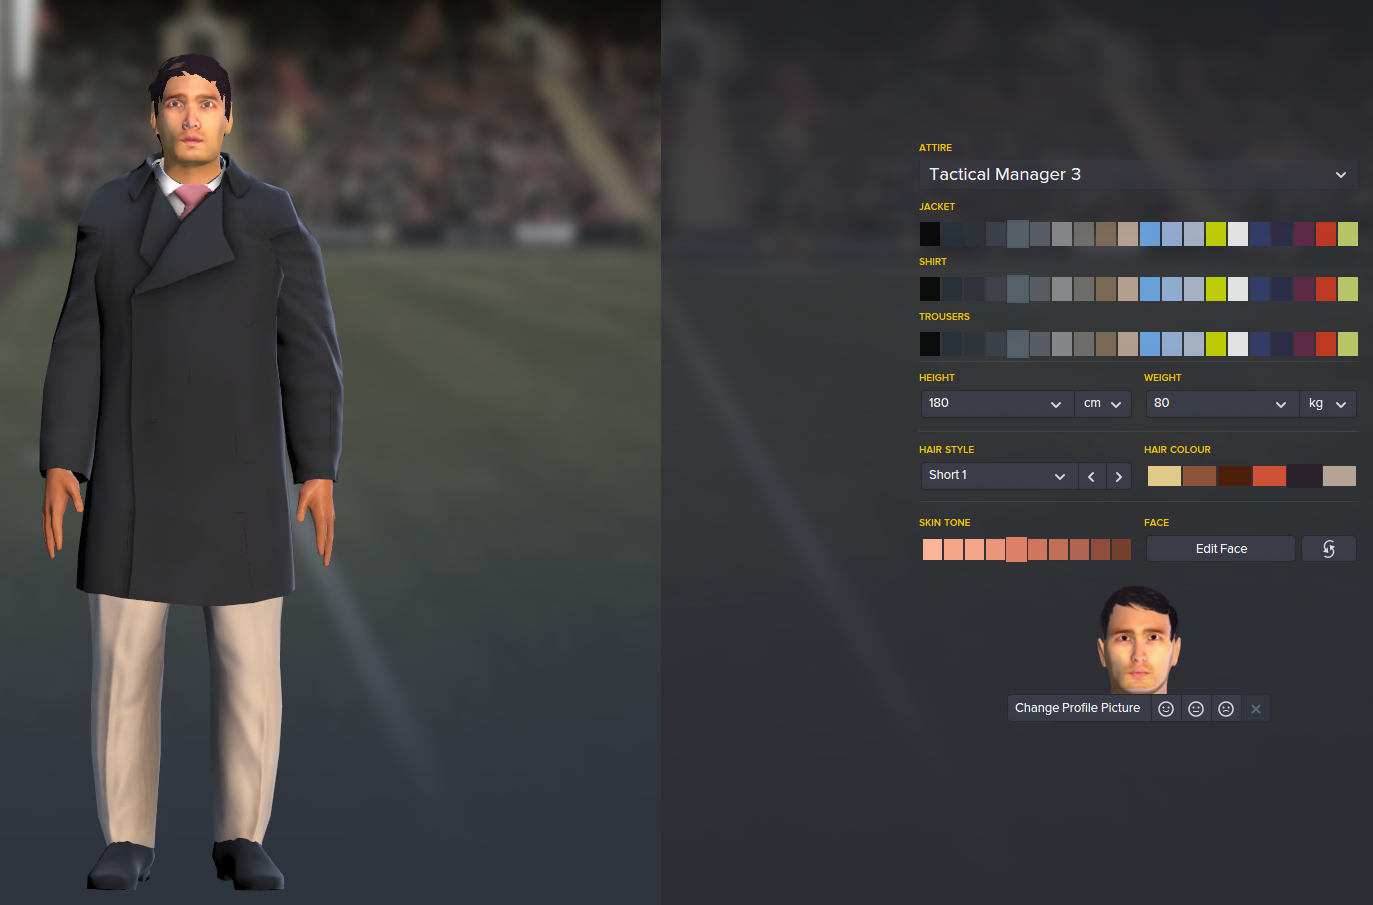 download football manager 2016 for free